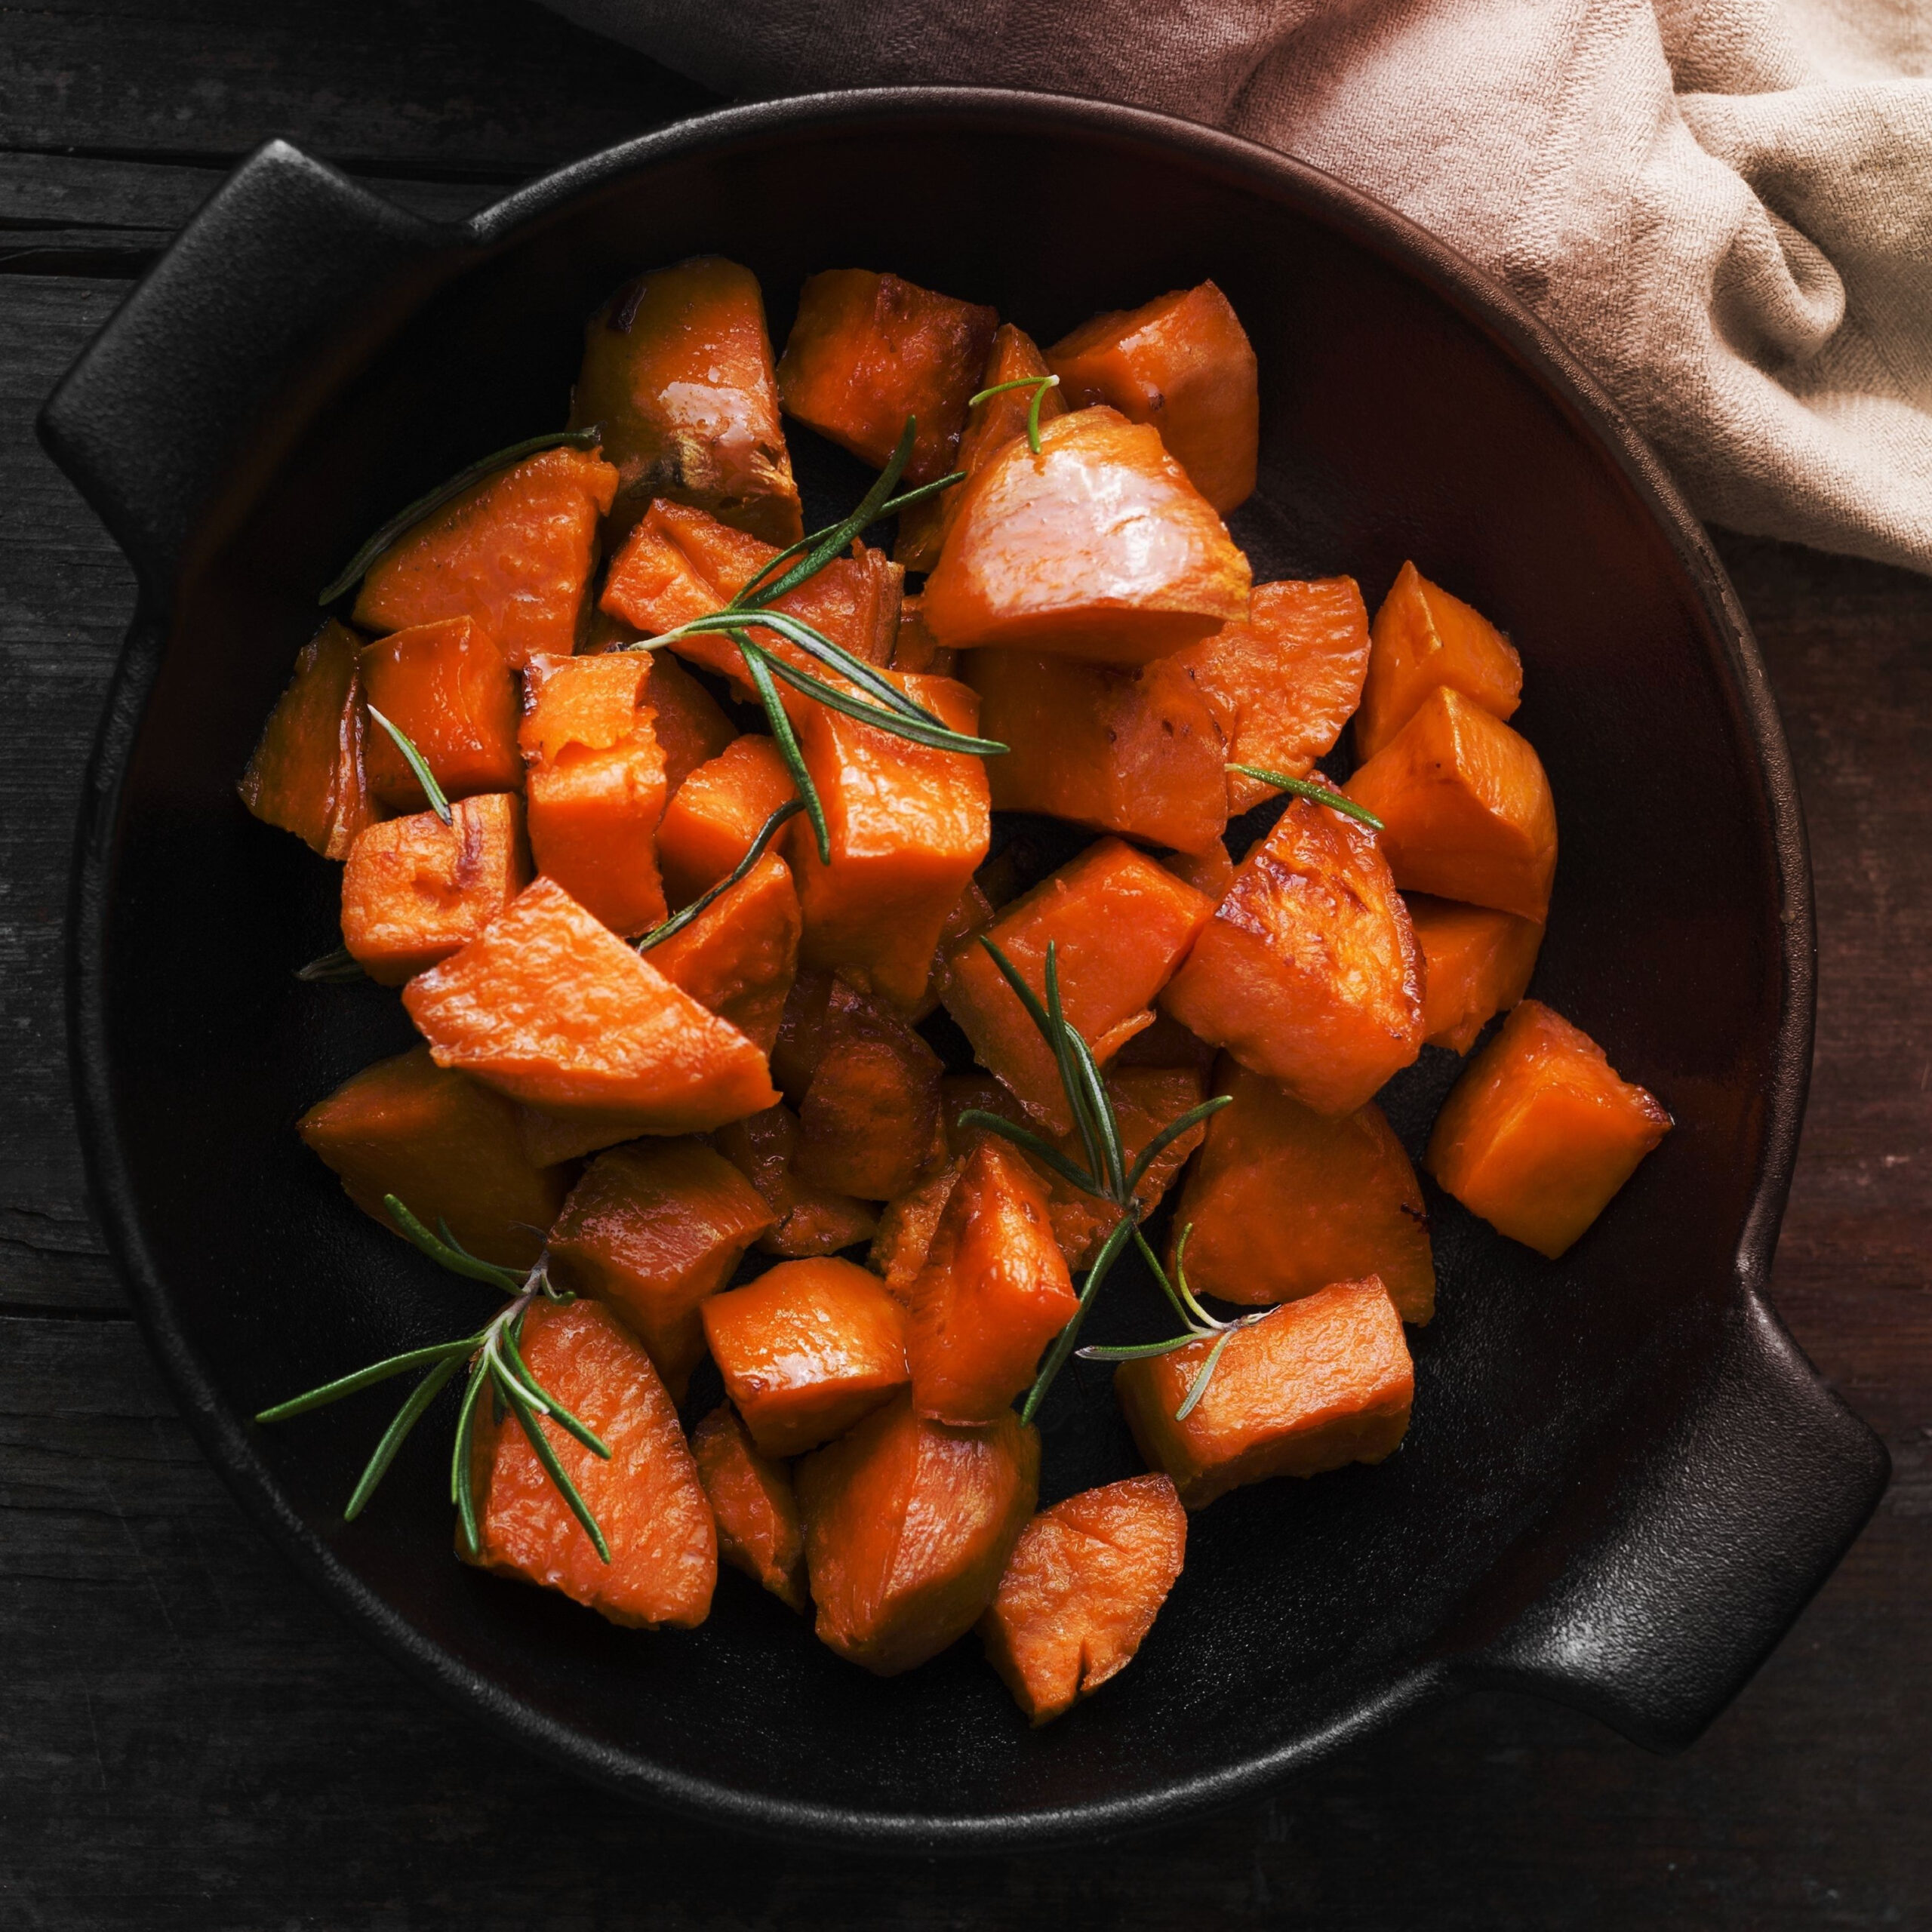 cubed sweet potato in skillet